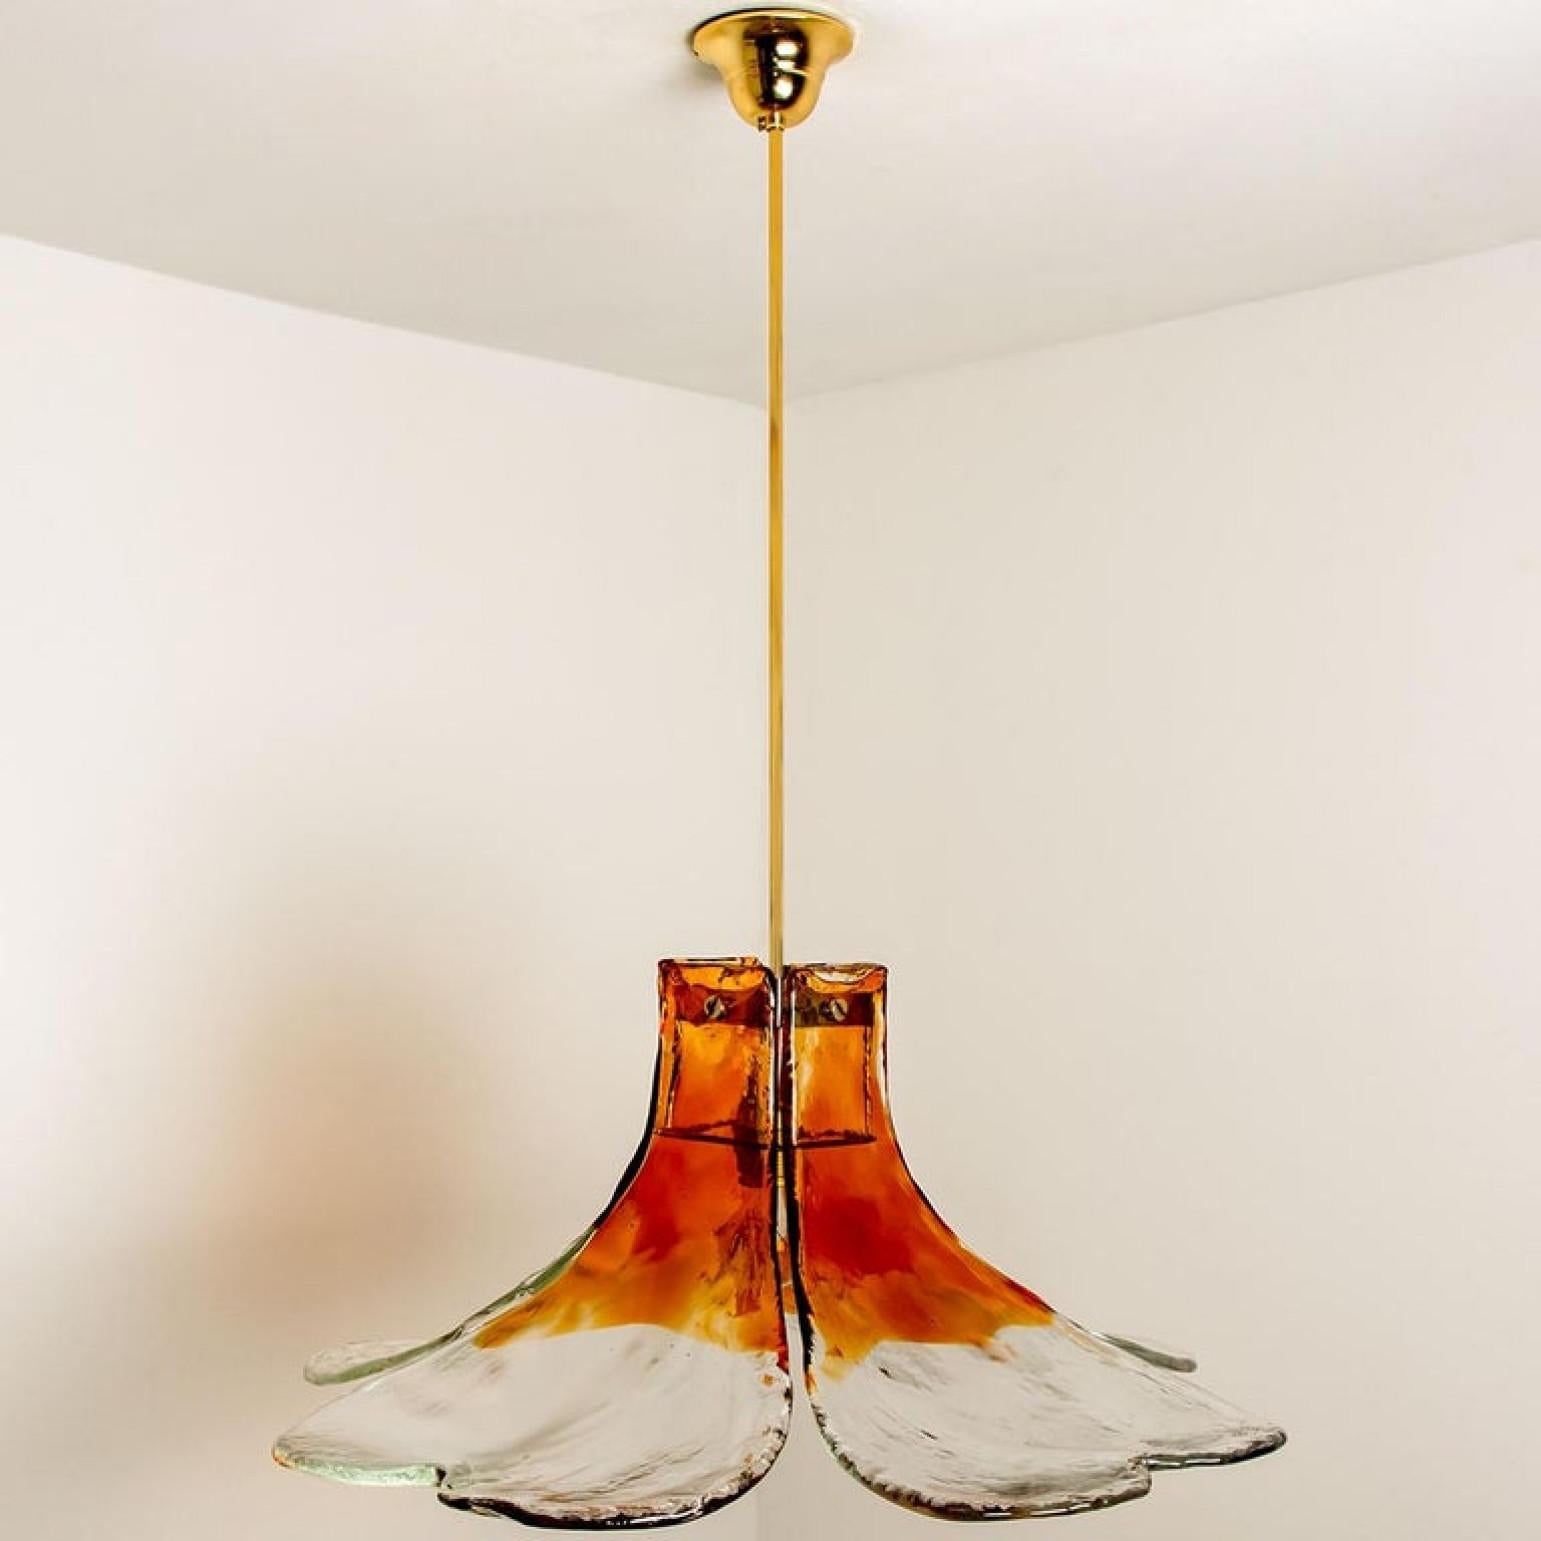 Other 1 of the 2 Pendant Lamps Model LS185 by Carlo Nason for Mazzega For Sale